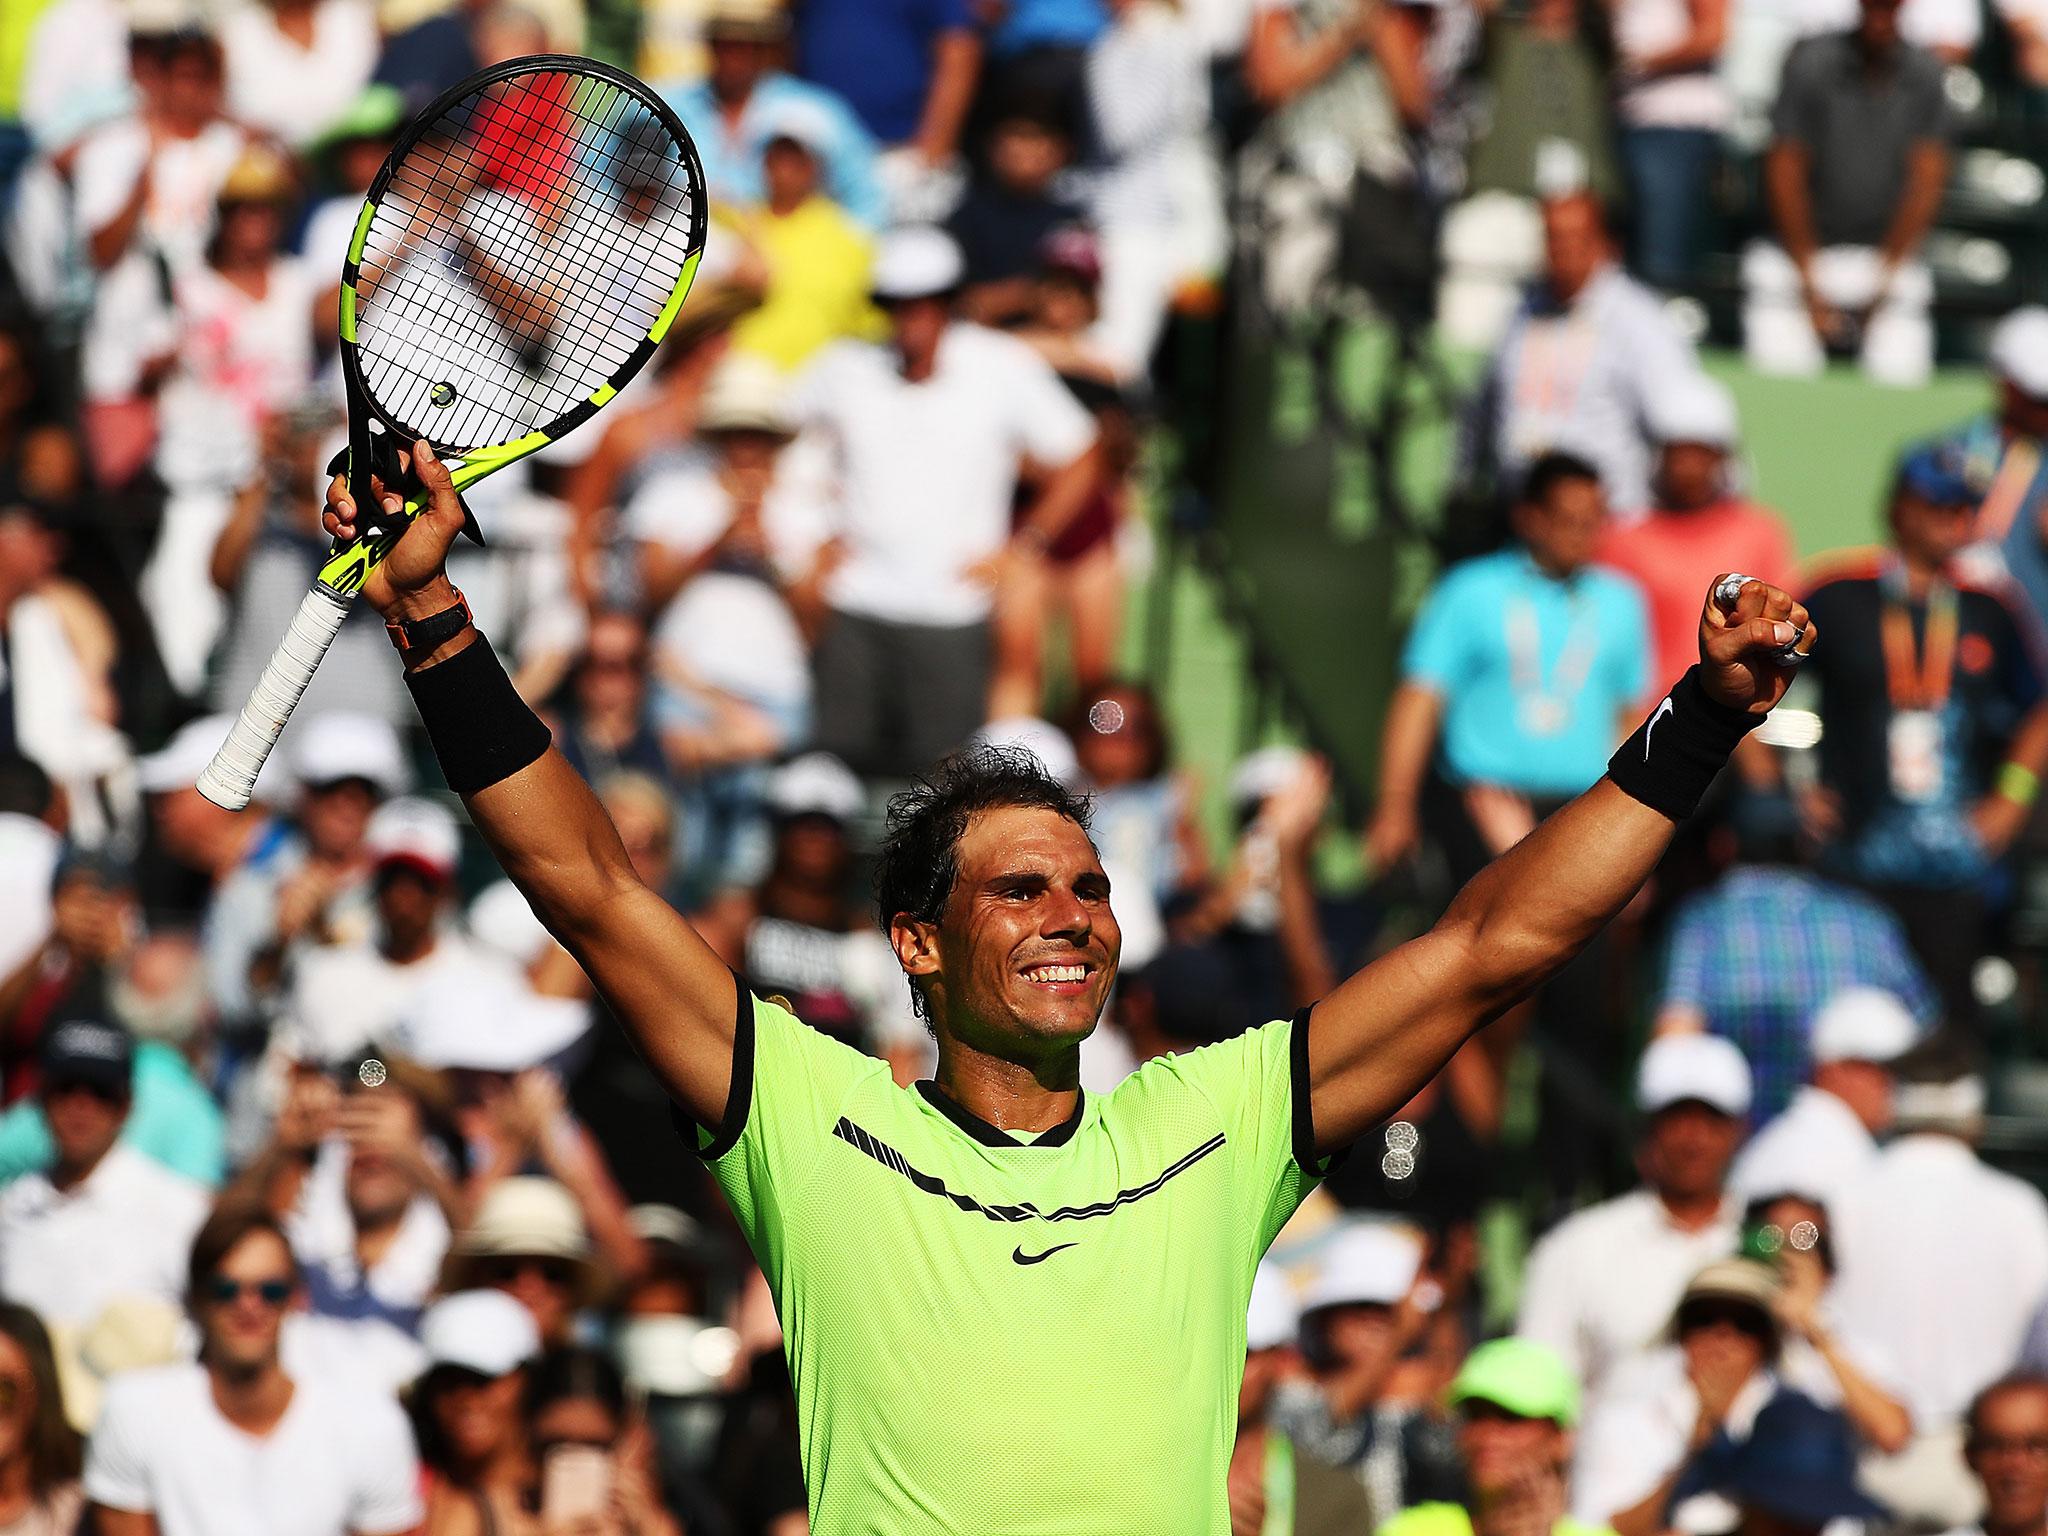 Rafael Nadal continued his good form in Miami with a win over Jack Sock